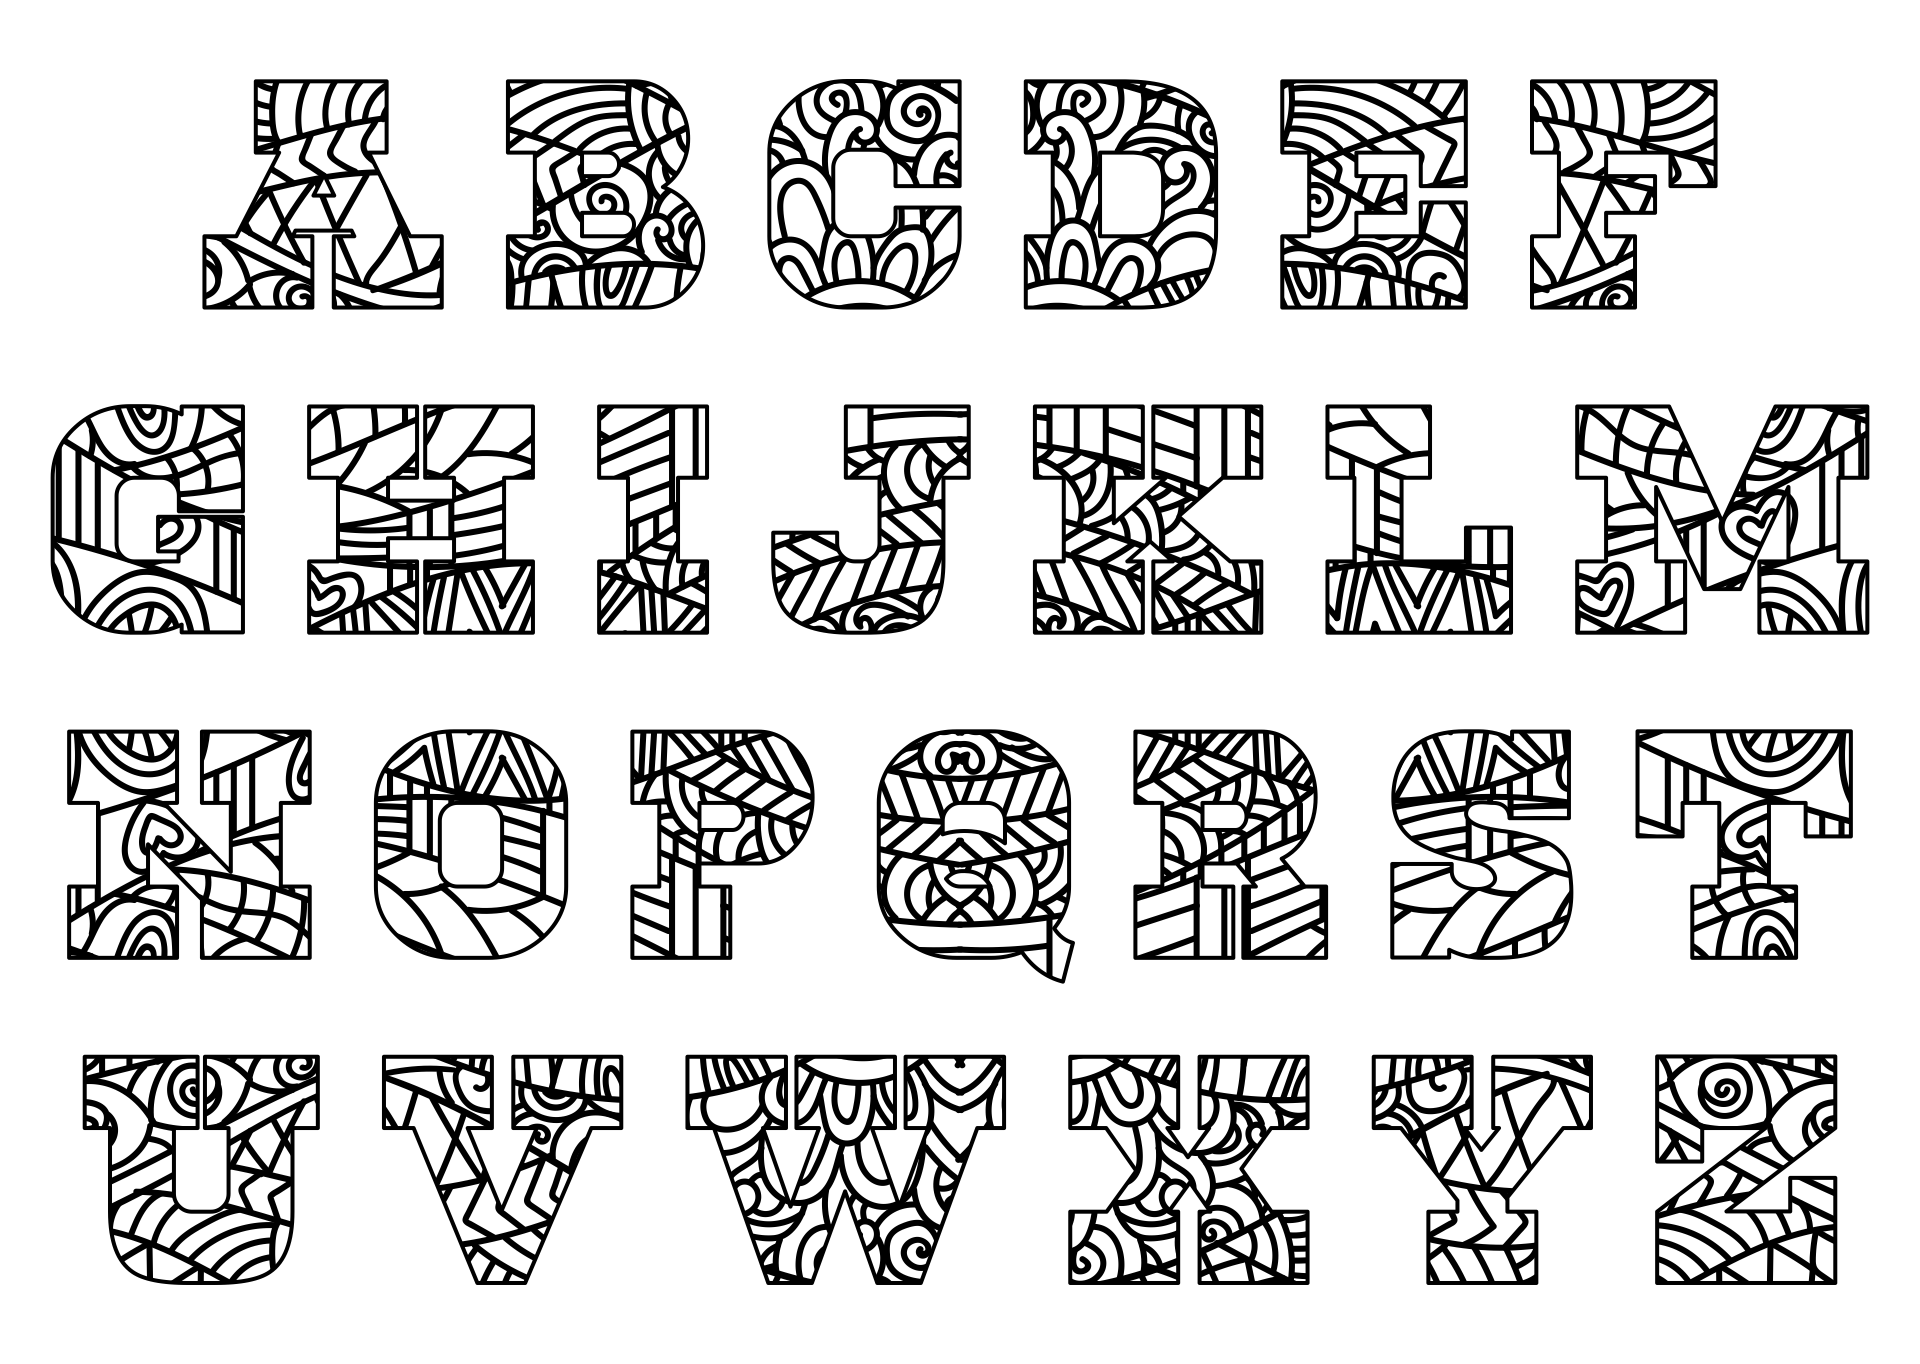 Alphabet Printable Images Gallery Category Page 11 printablee com